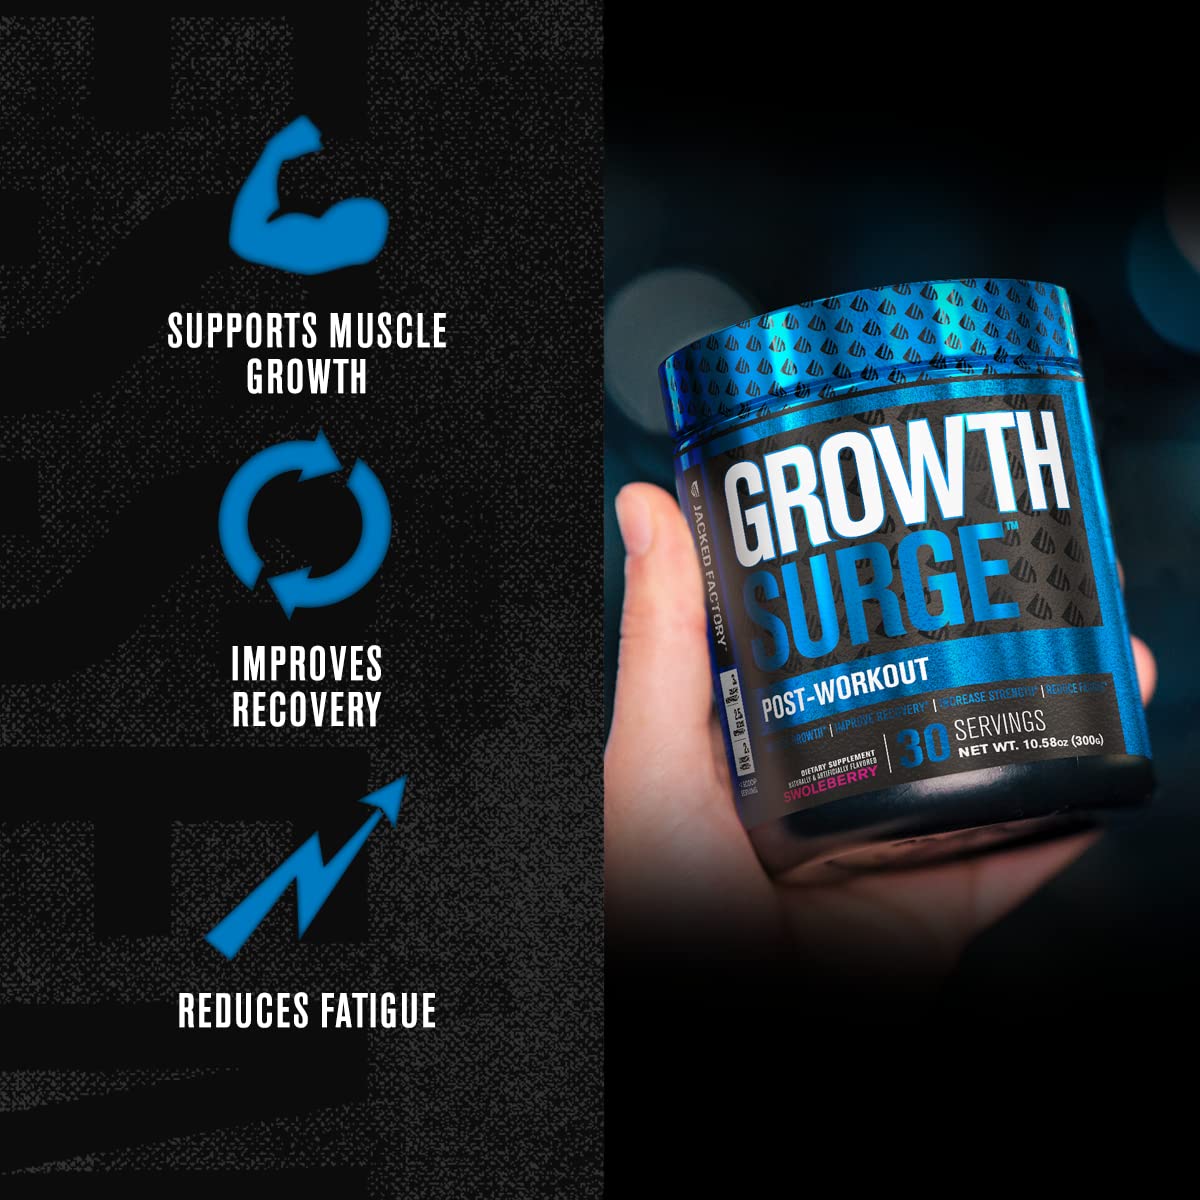 Jacked Factory N.O. XT Nitric Oxide Supplement, Growth Surge Post Workout Muscle Builder, Build XT Muscle Builder